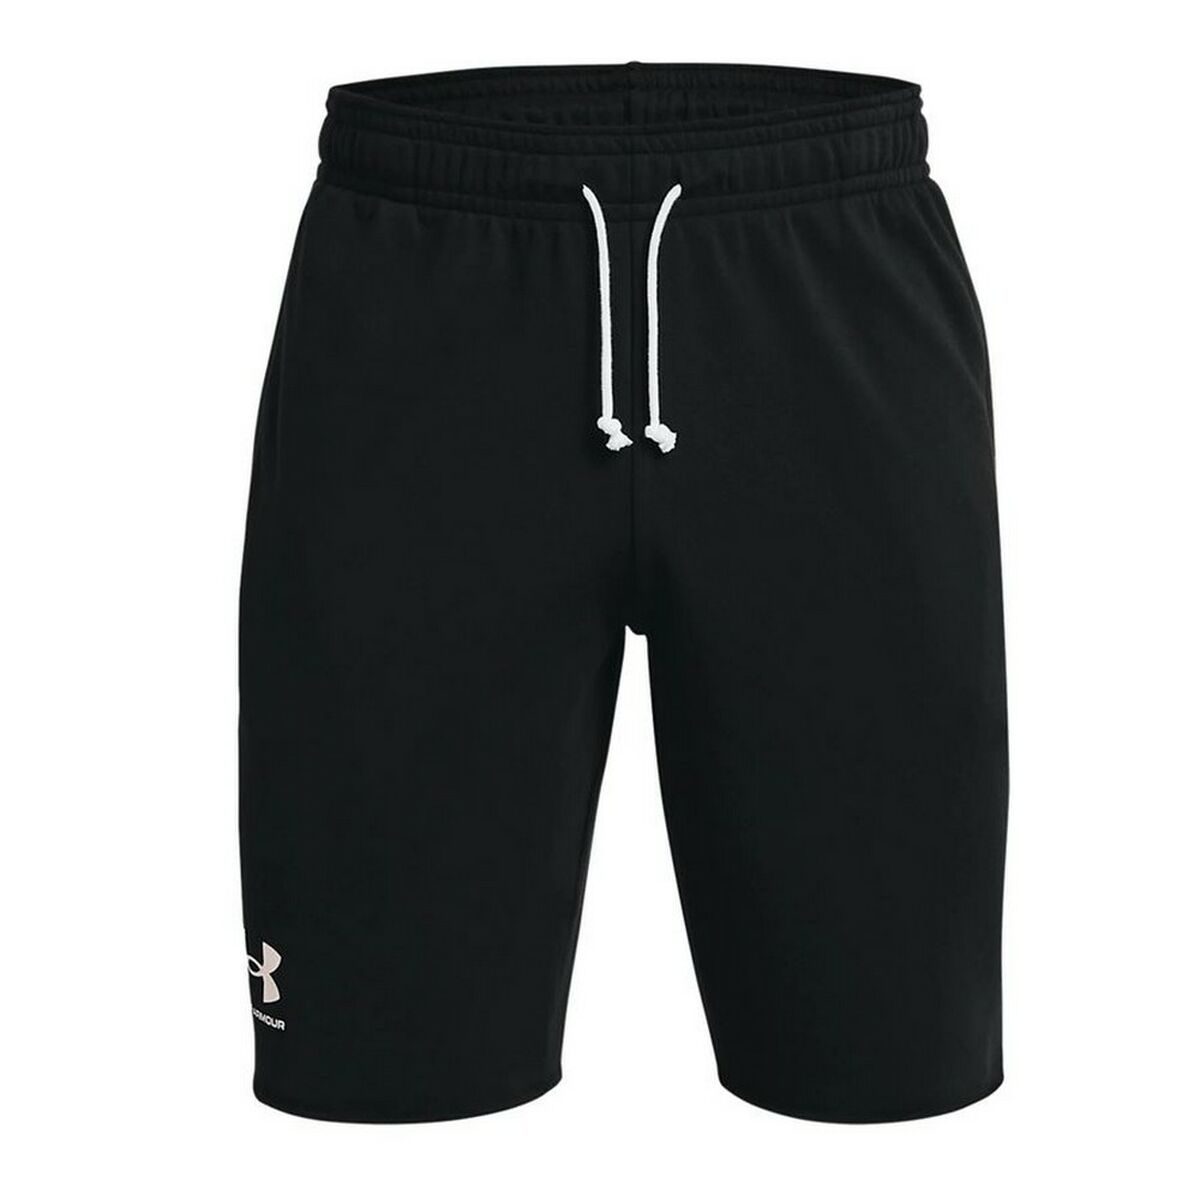 Men's Sports Shorts Under Armour Rival Terry Black S